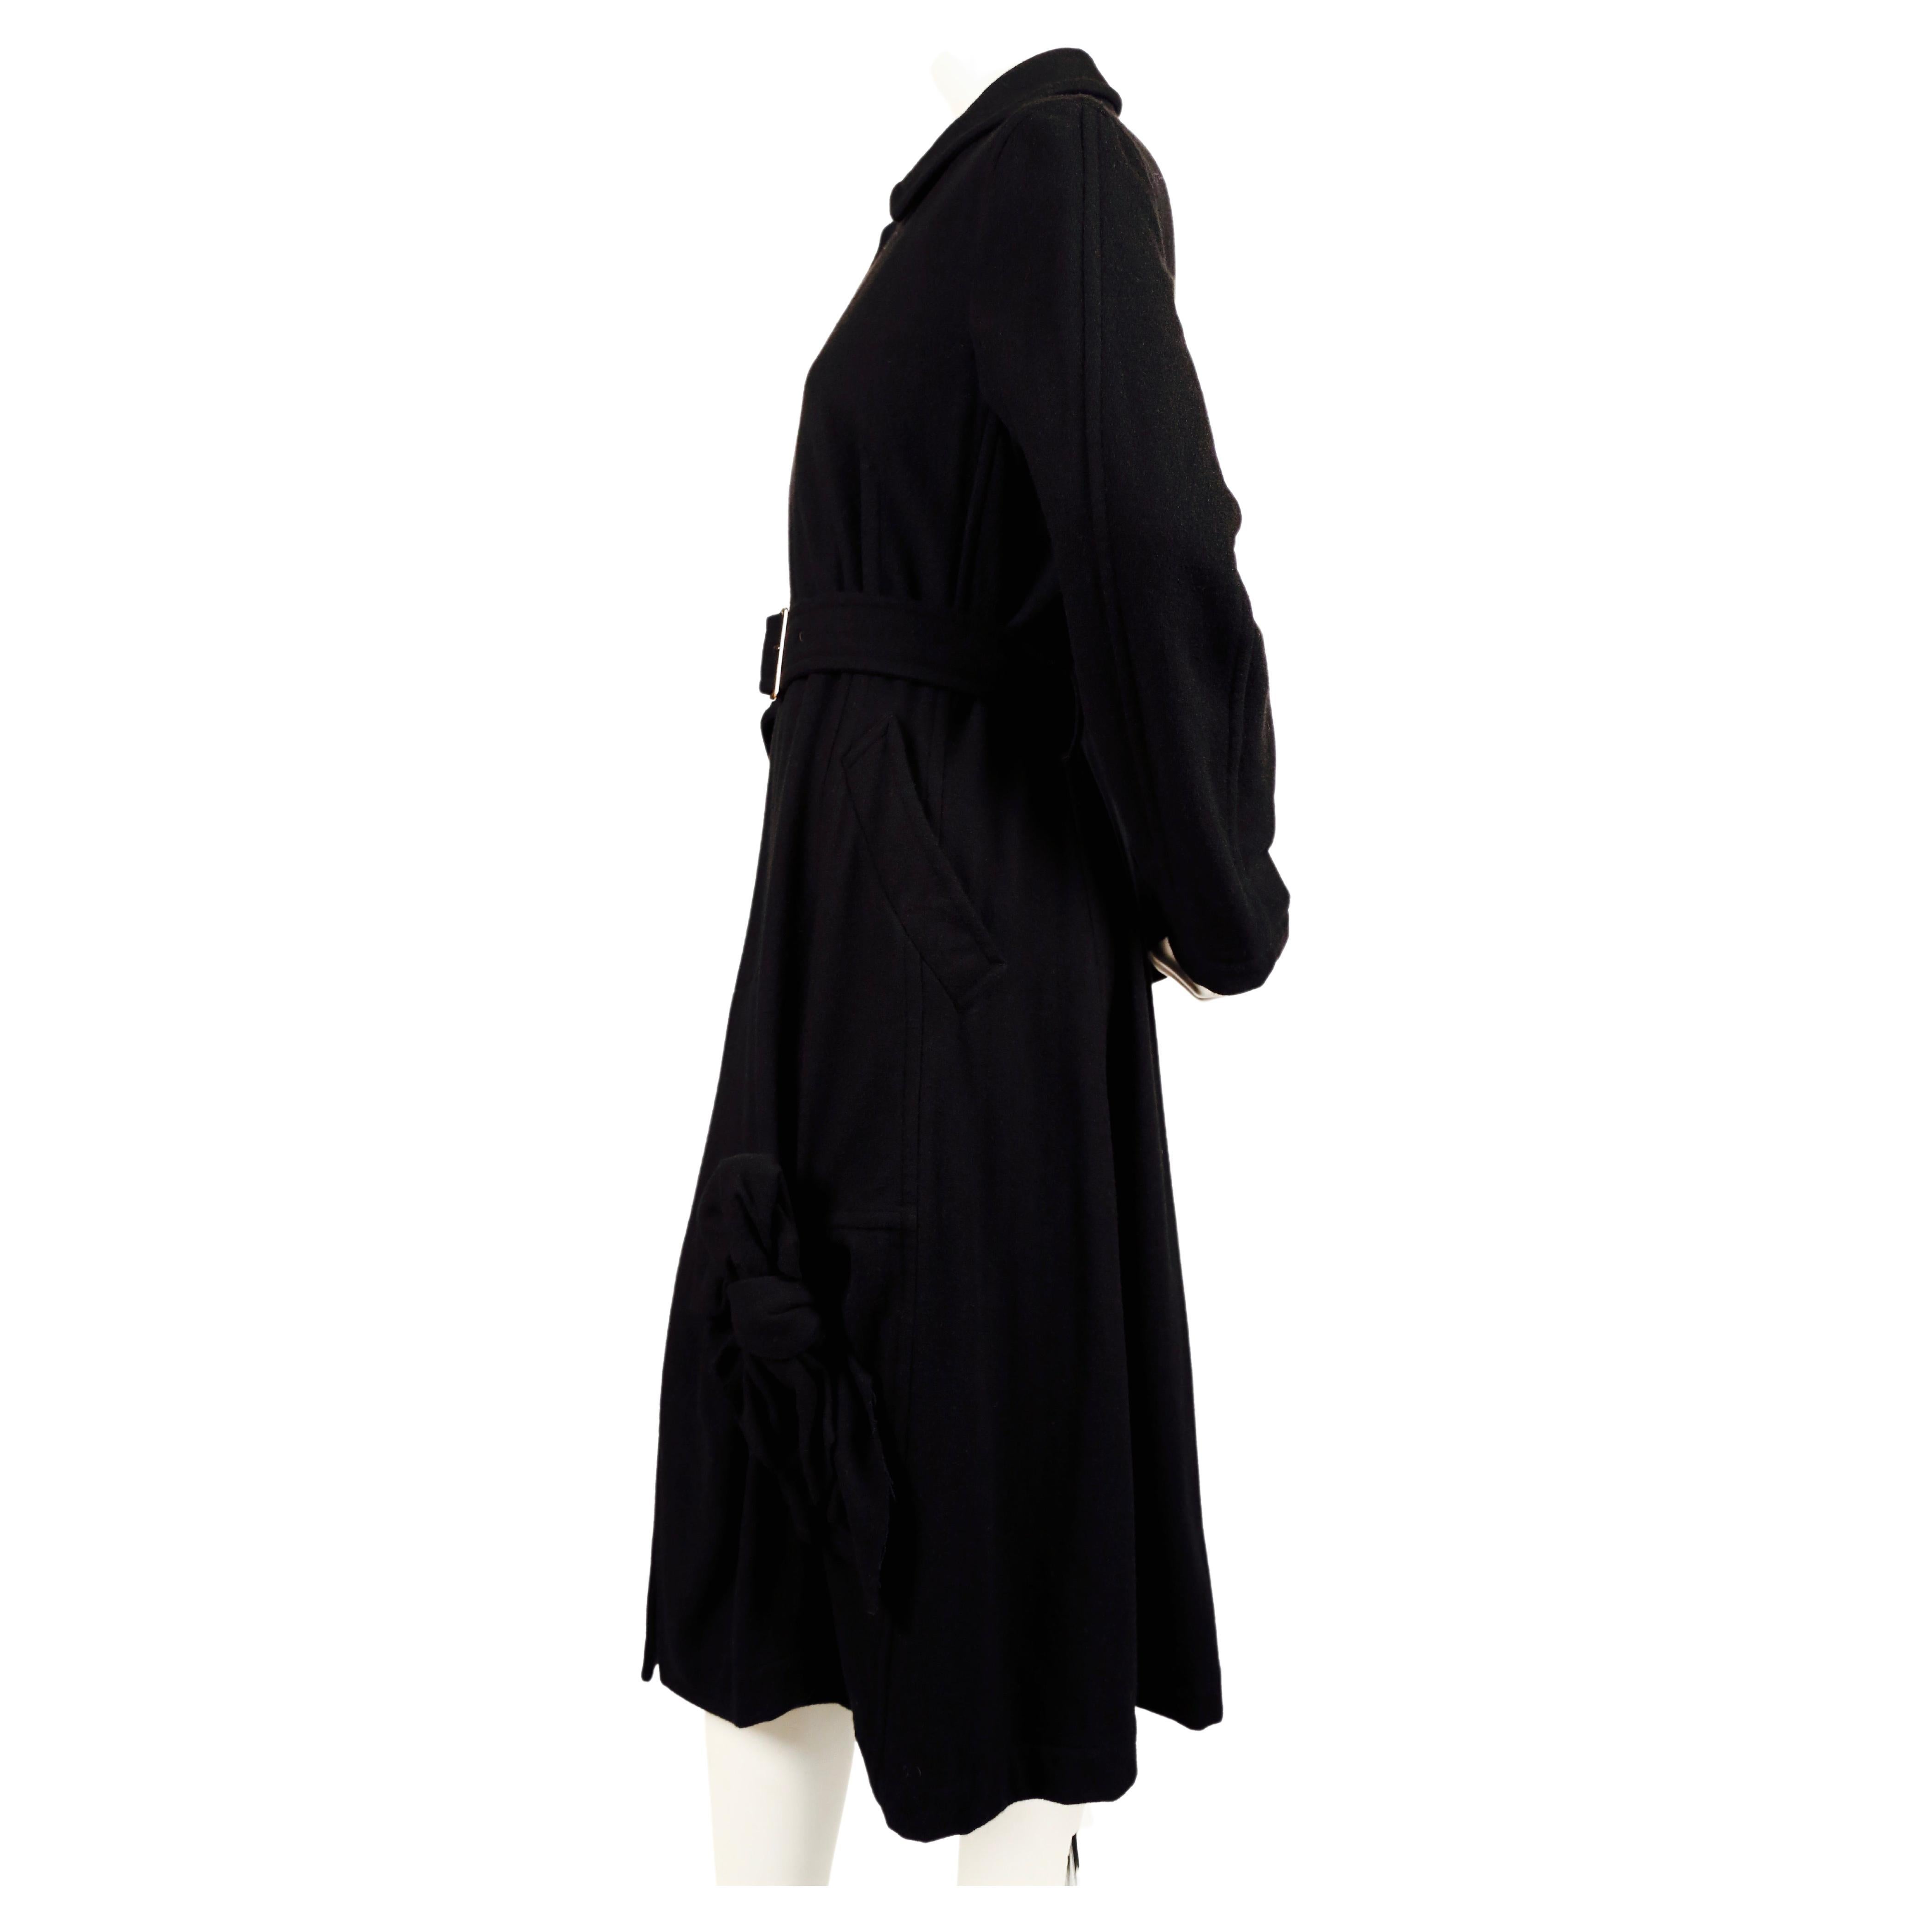 Jet black wool coat with unique 'knot' detail from Comme Des Garcons dating to 2003. Size is unlabeled however coat best fits a small or medium. Approximate measurements: shoulder 16